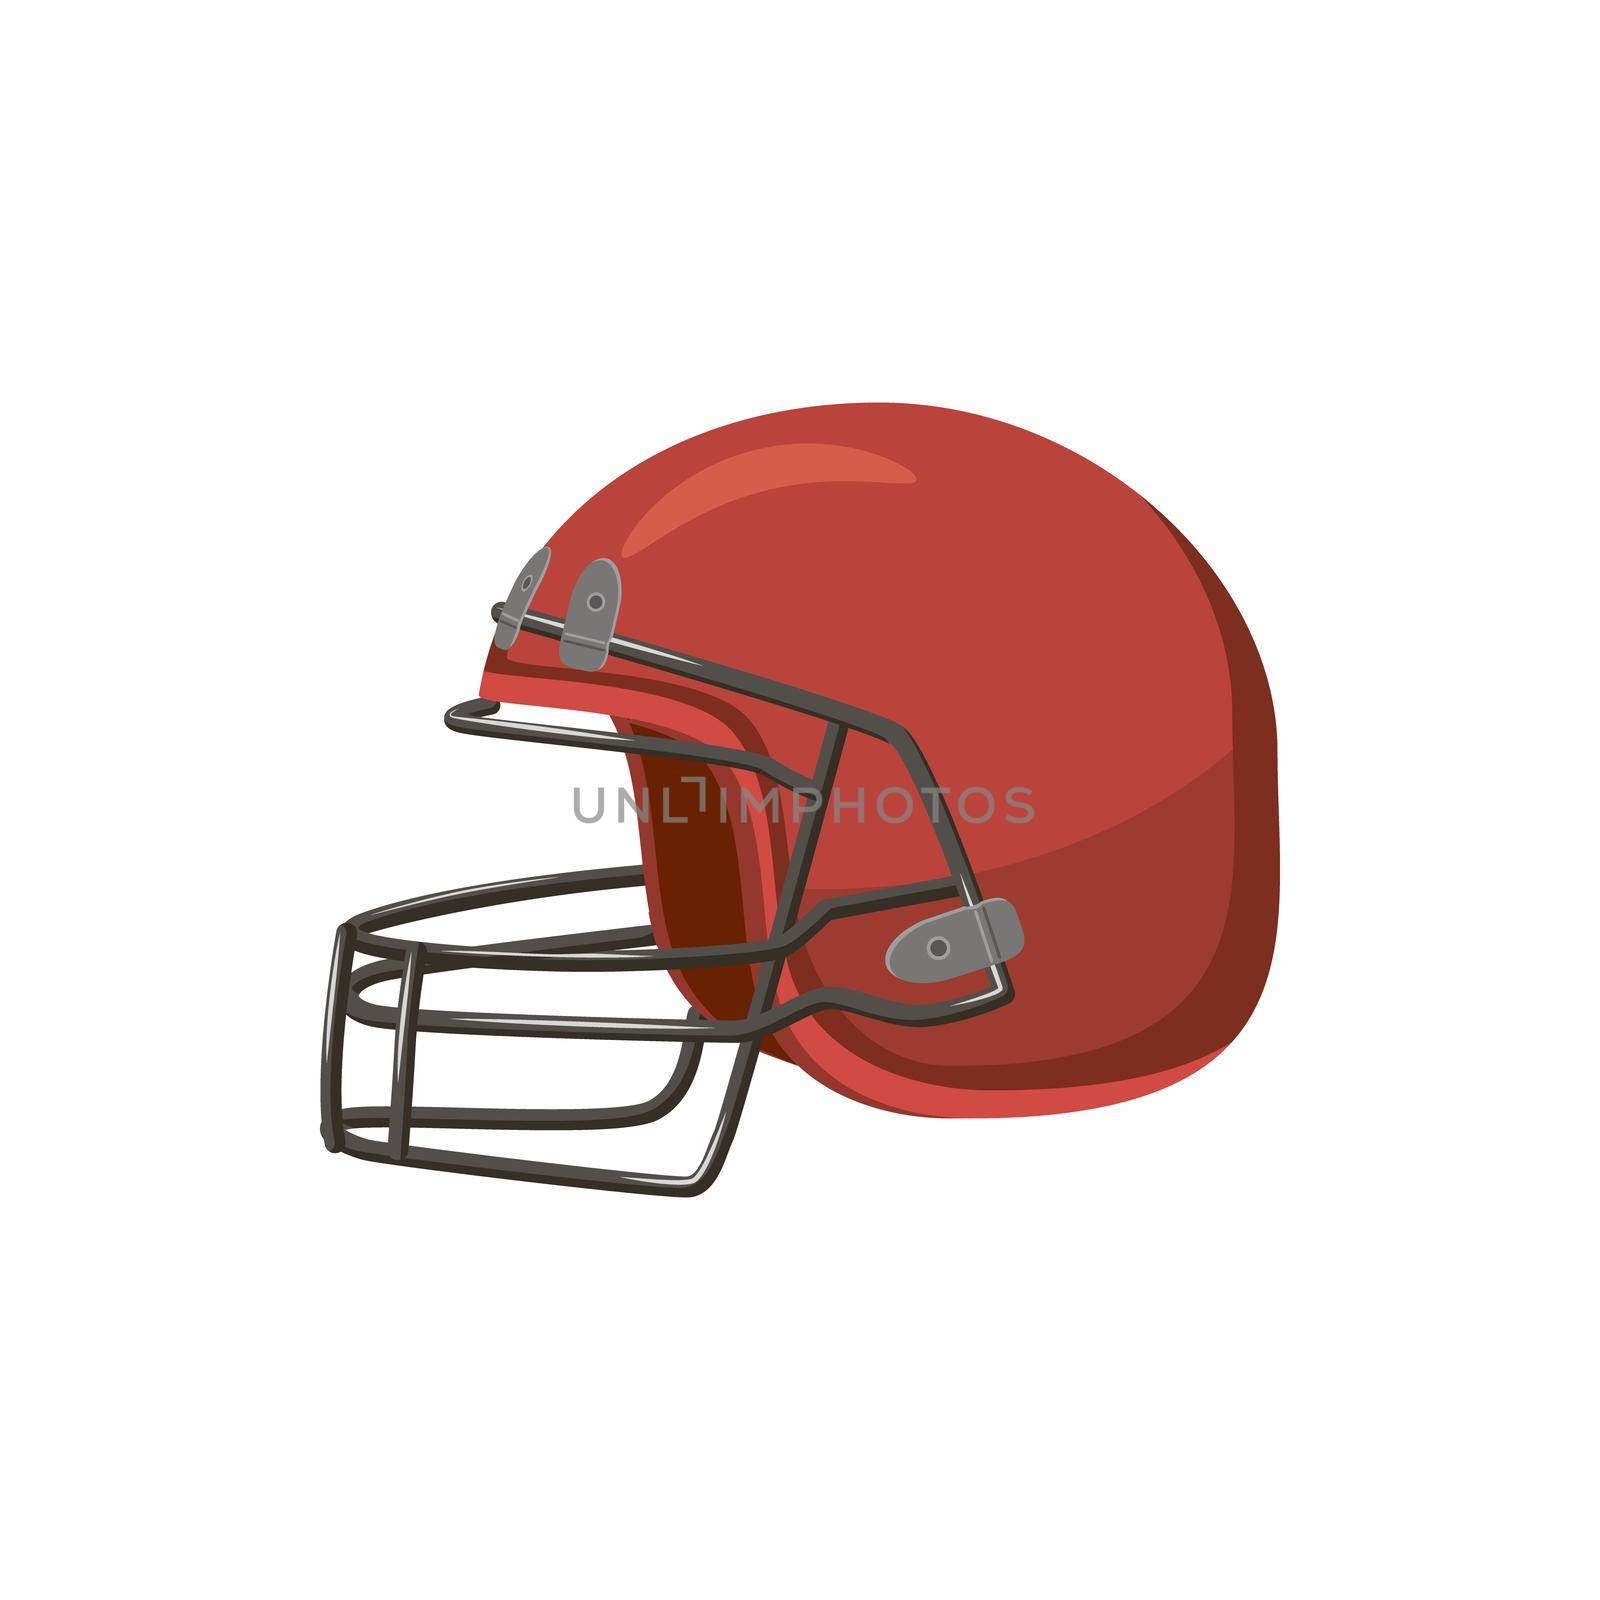 Football helmet with face mask icon, cartoon style by ylivdesign